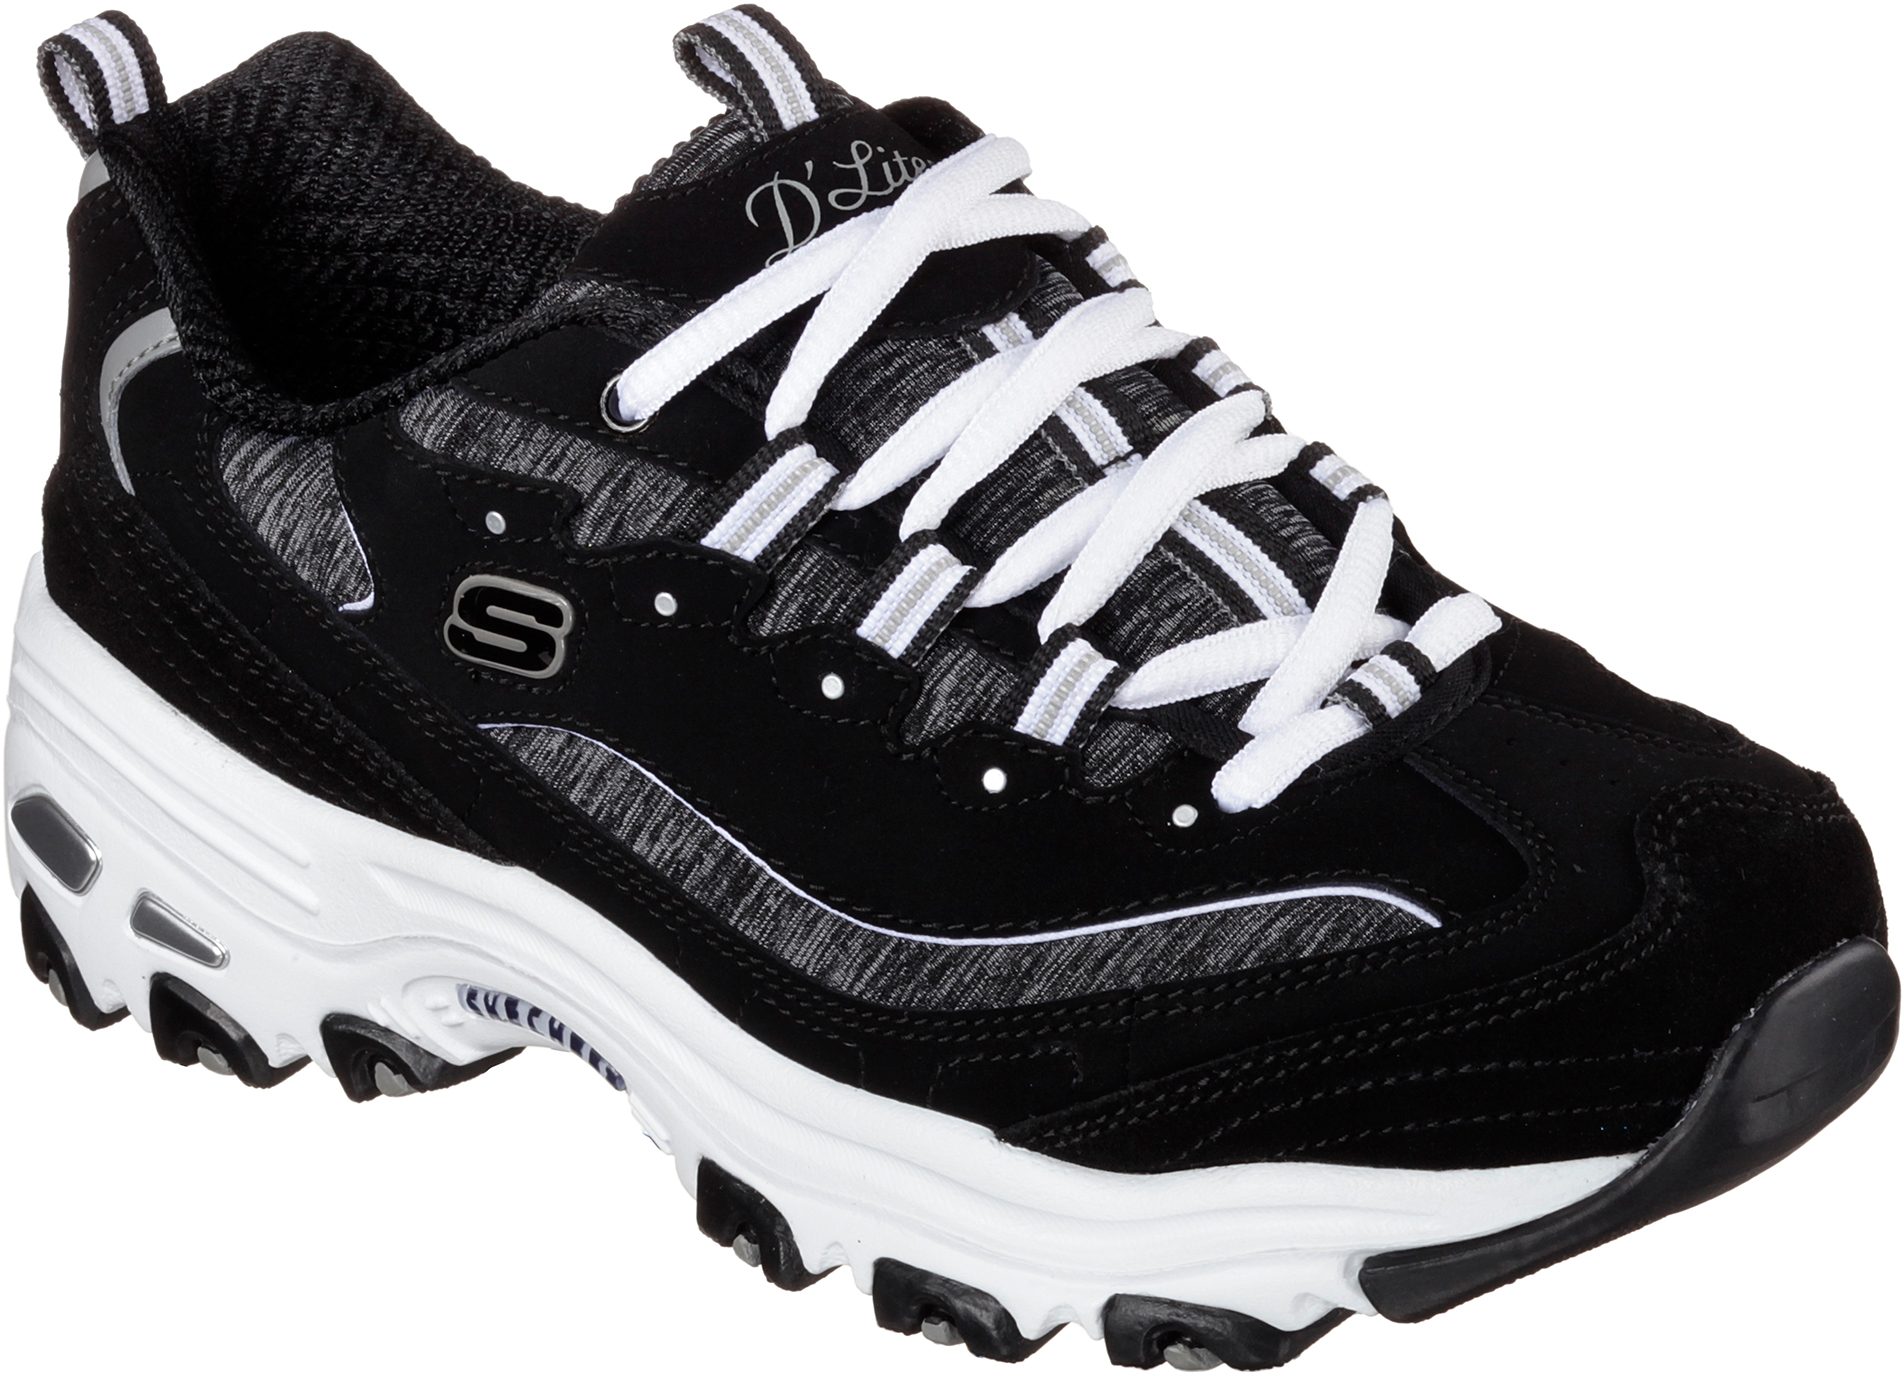 Skechers D'lites - Me Time Black / White 11936 BKW - Womens Trainers ...